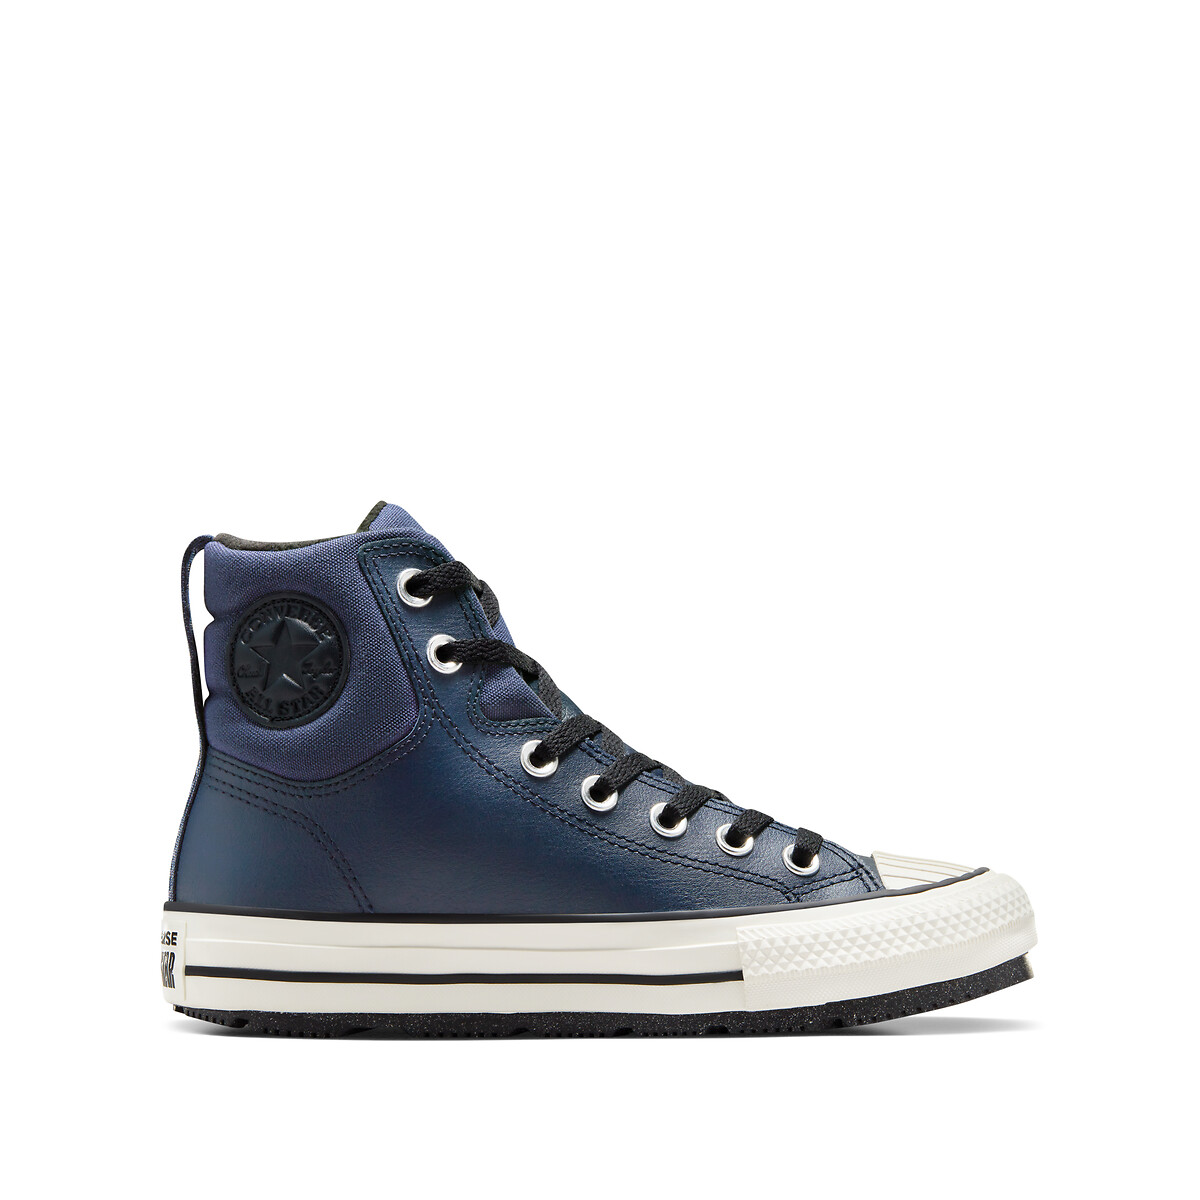 Sneakers Berkshire Boot Counter Climate von Converse